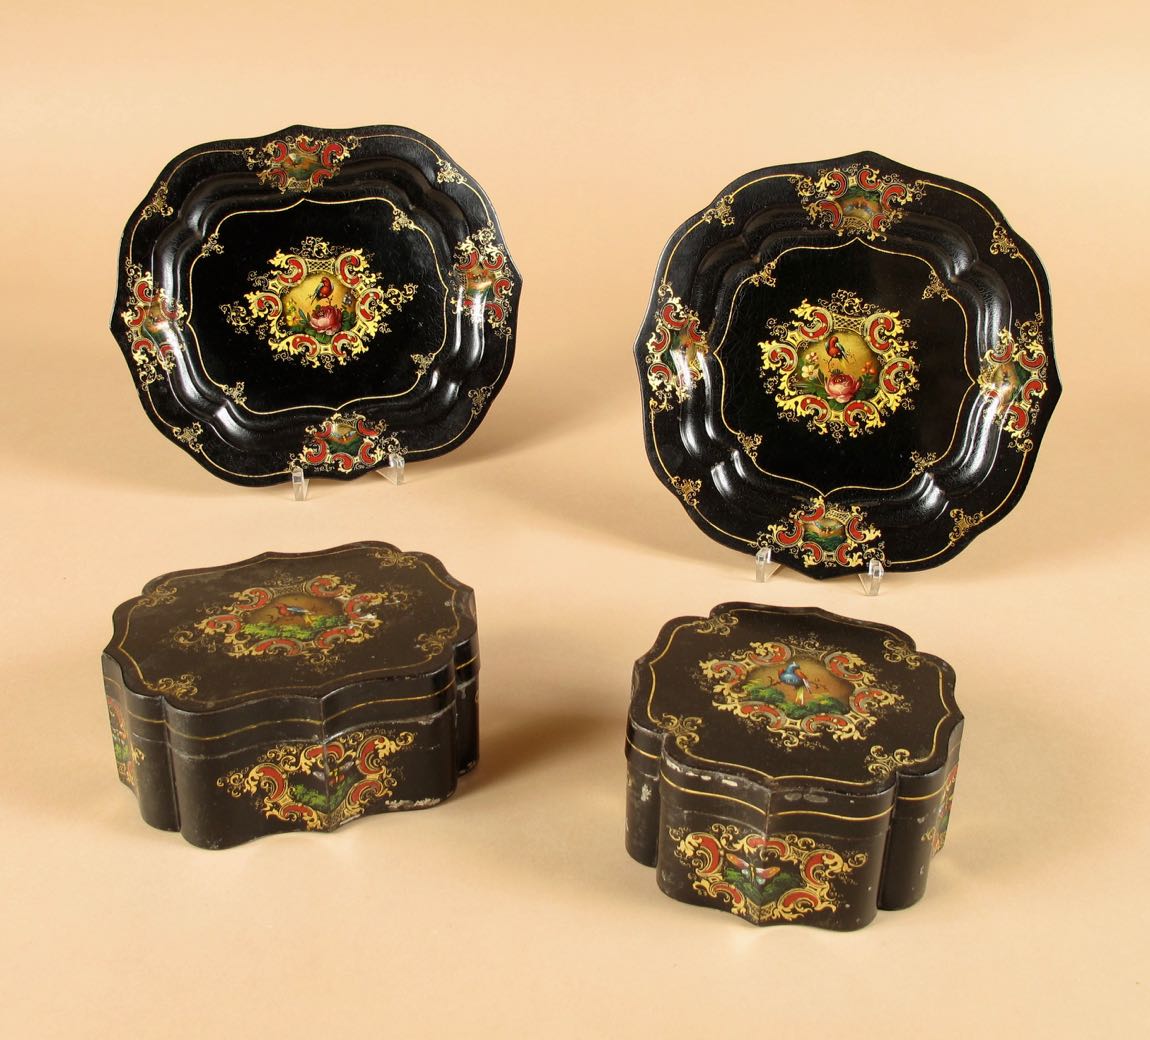 A Complete Set Of Two Lacquered Boxes With Trays, Toleware, England